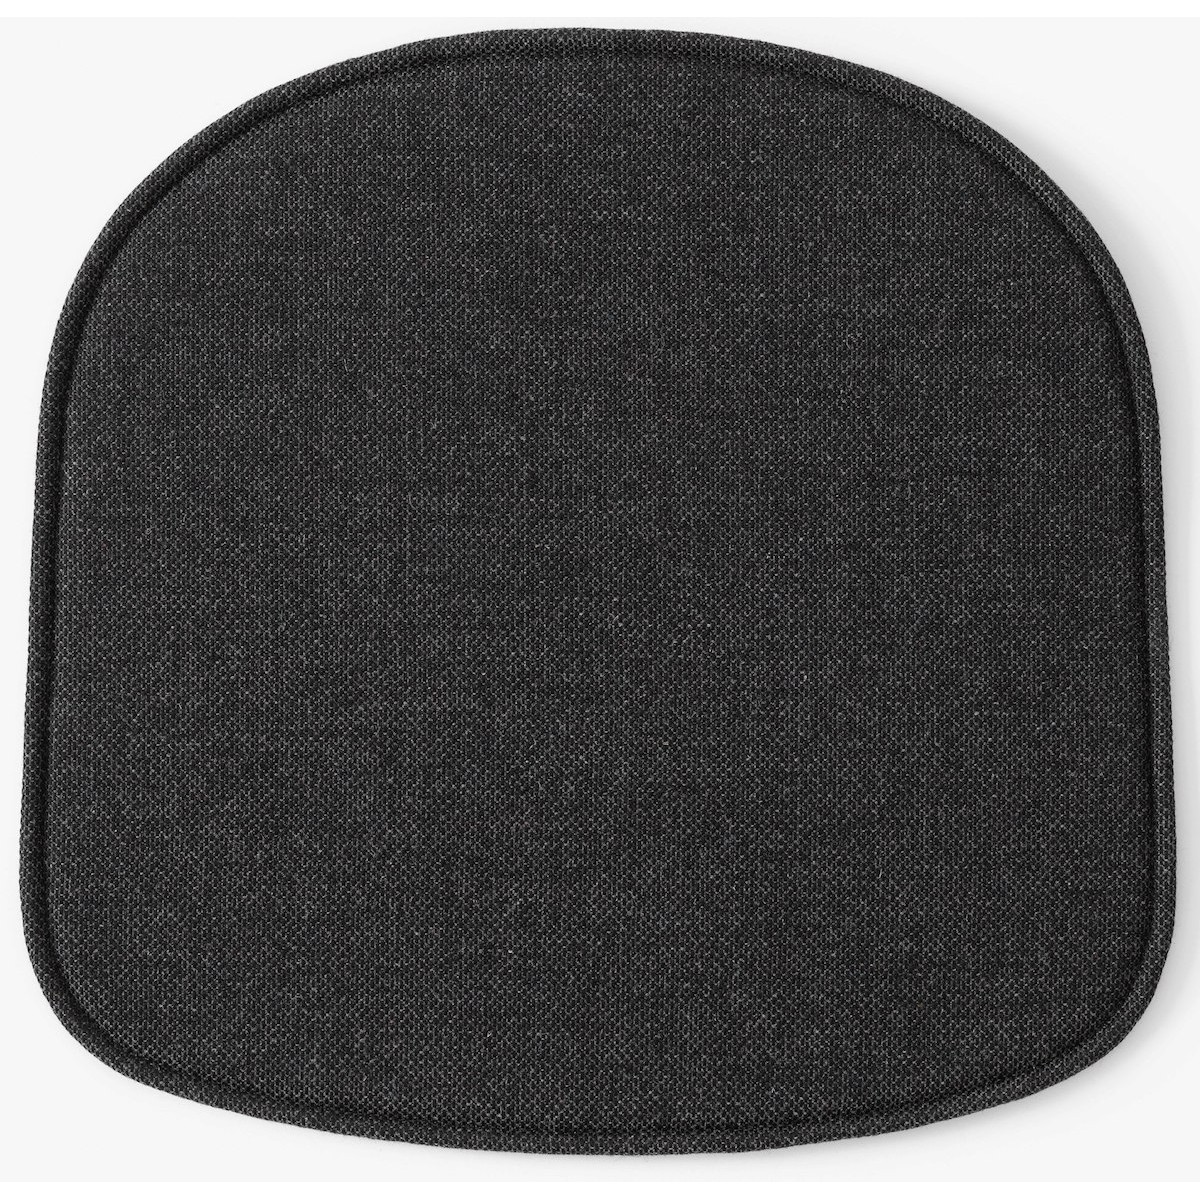 Rely HW6 Seat Pad – Re-Wool 198